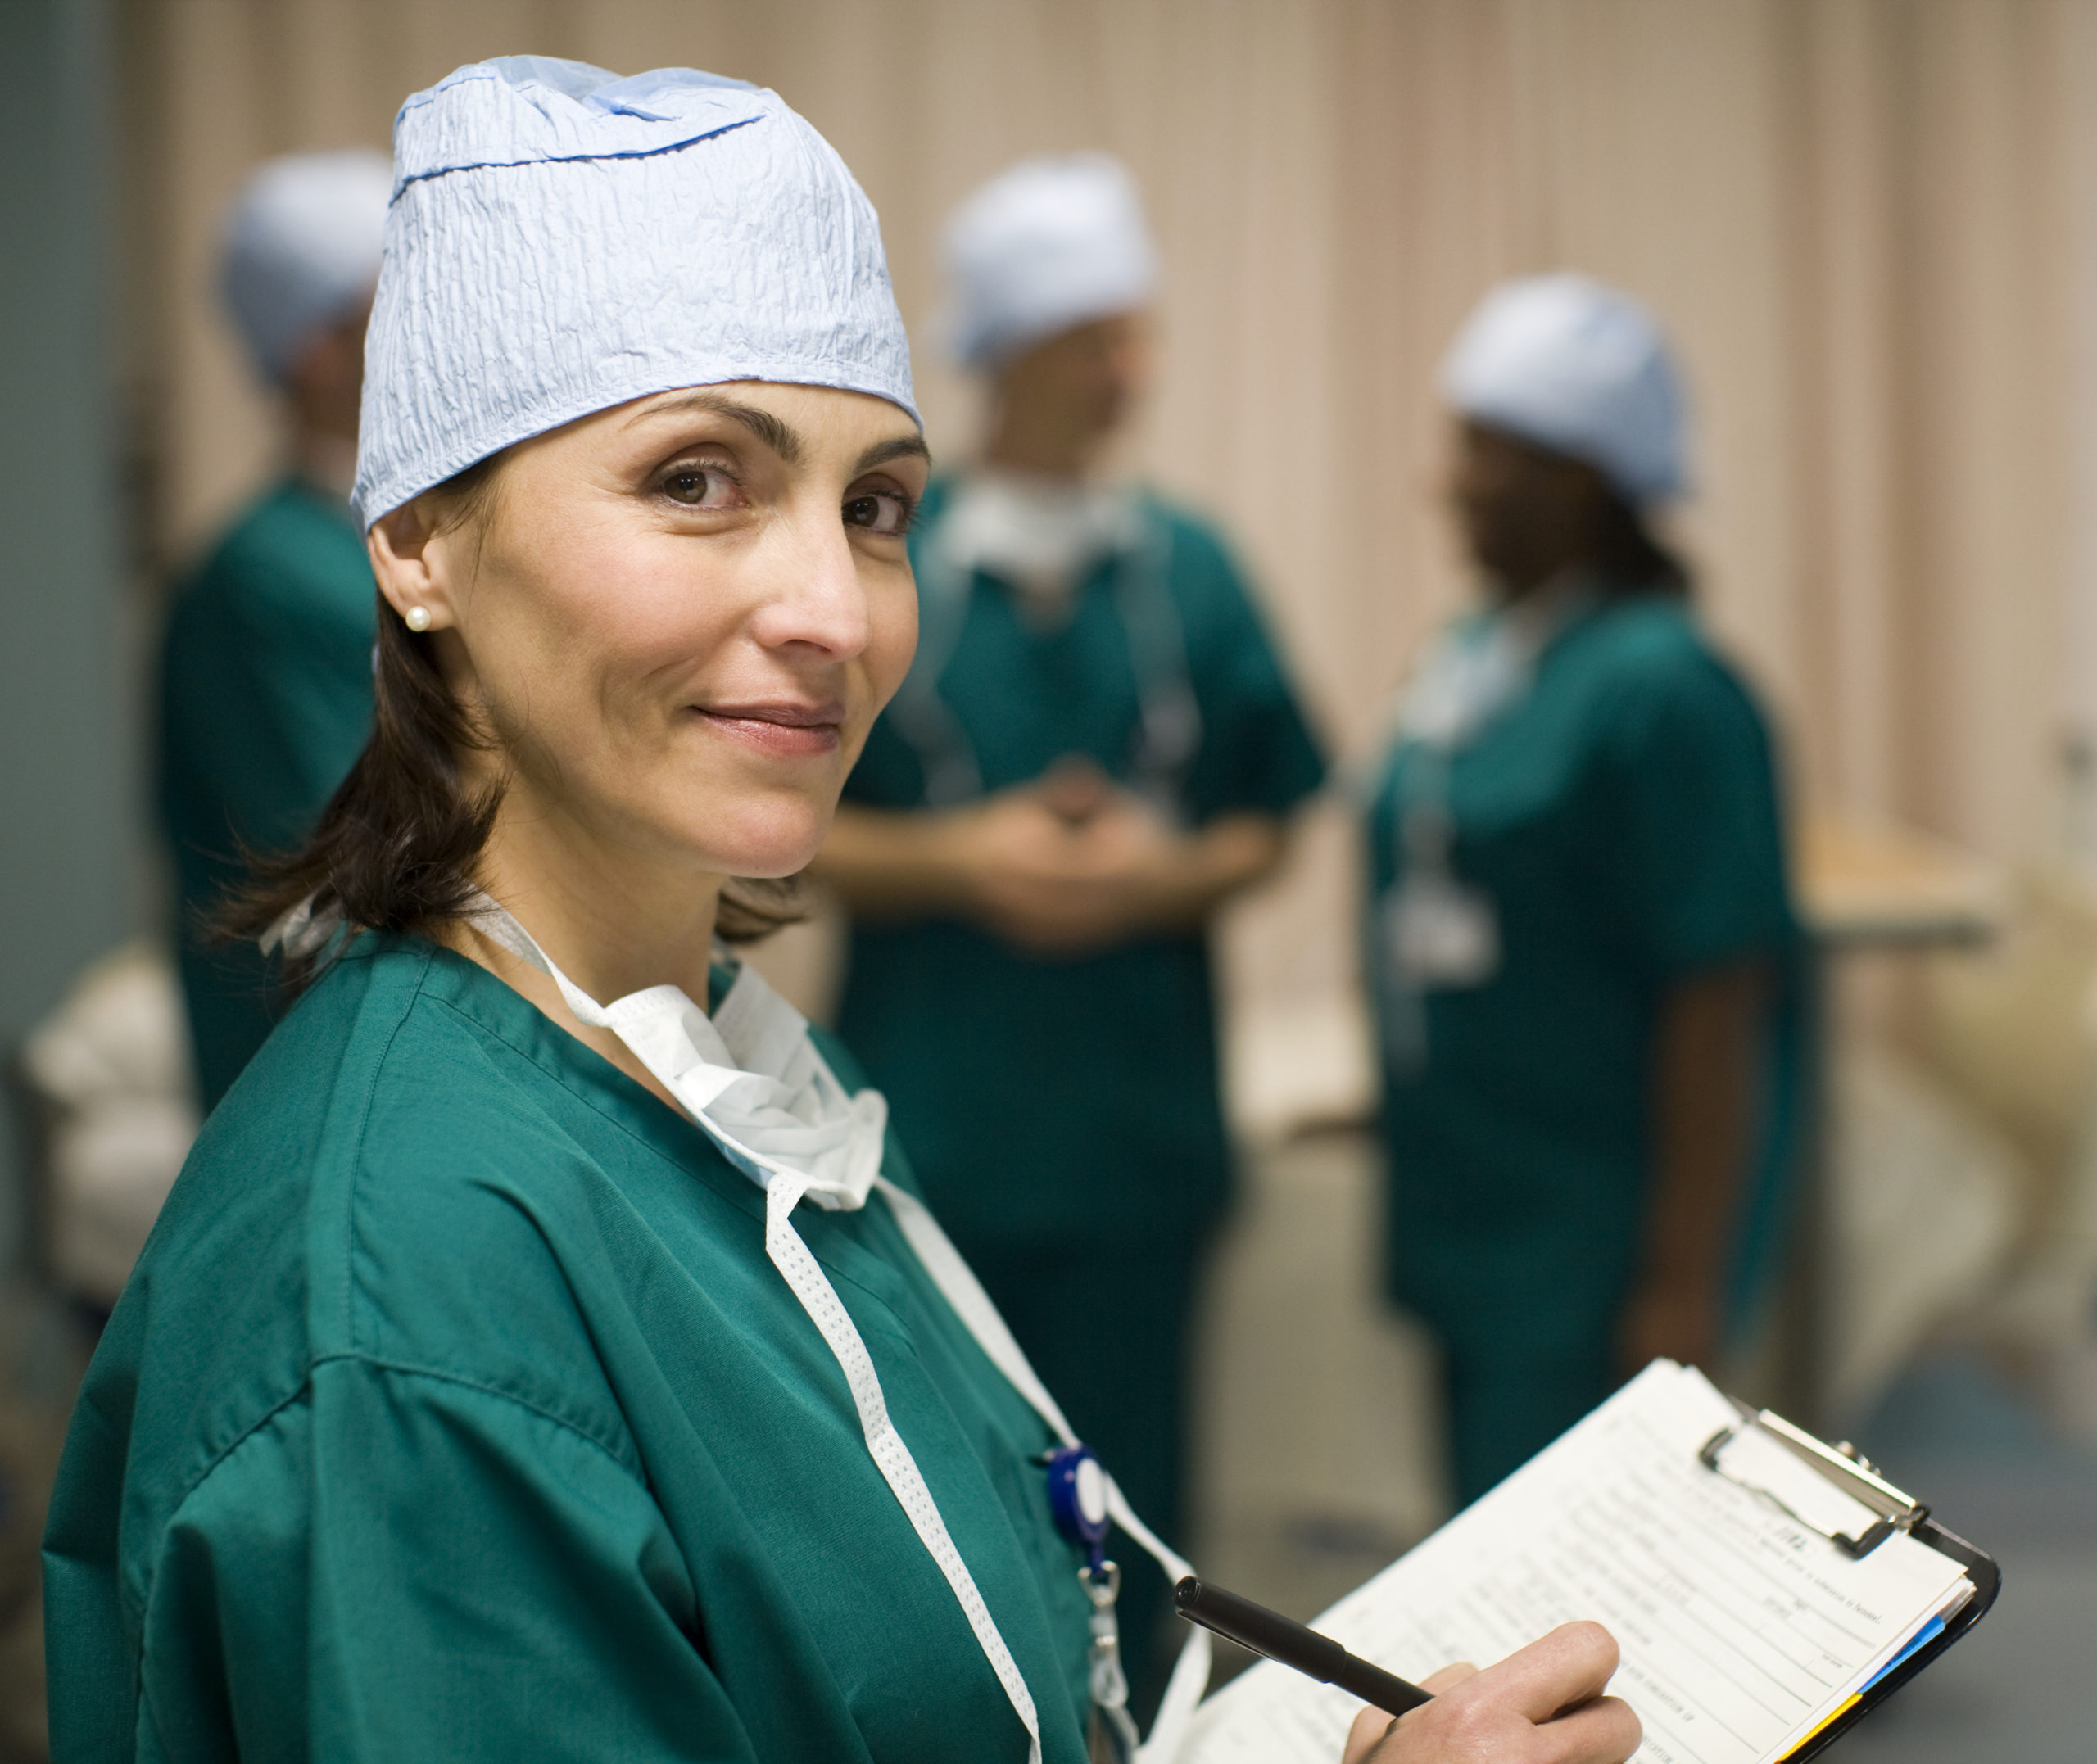 female surgeon smiling confidently as she checks a patient chart, her operating room is optimized